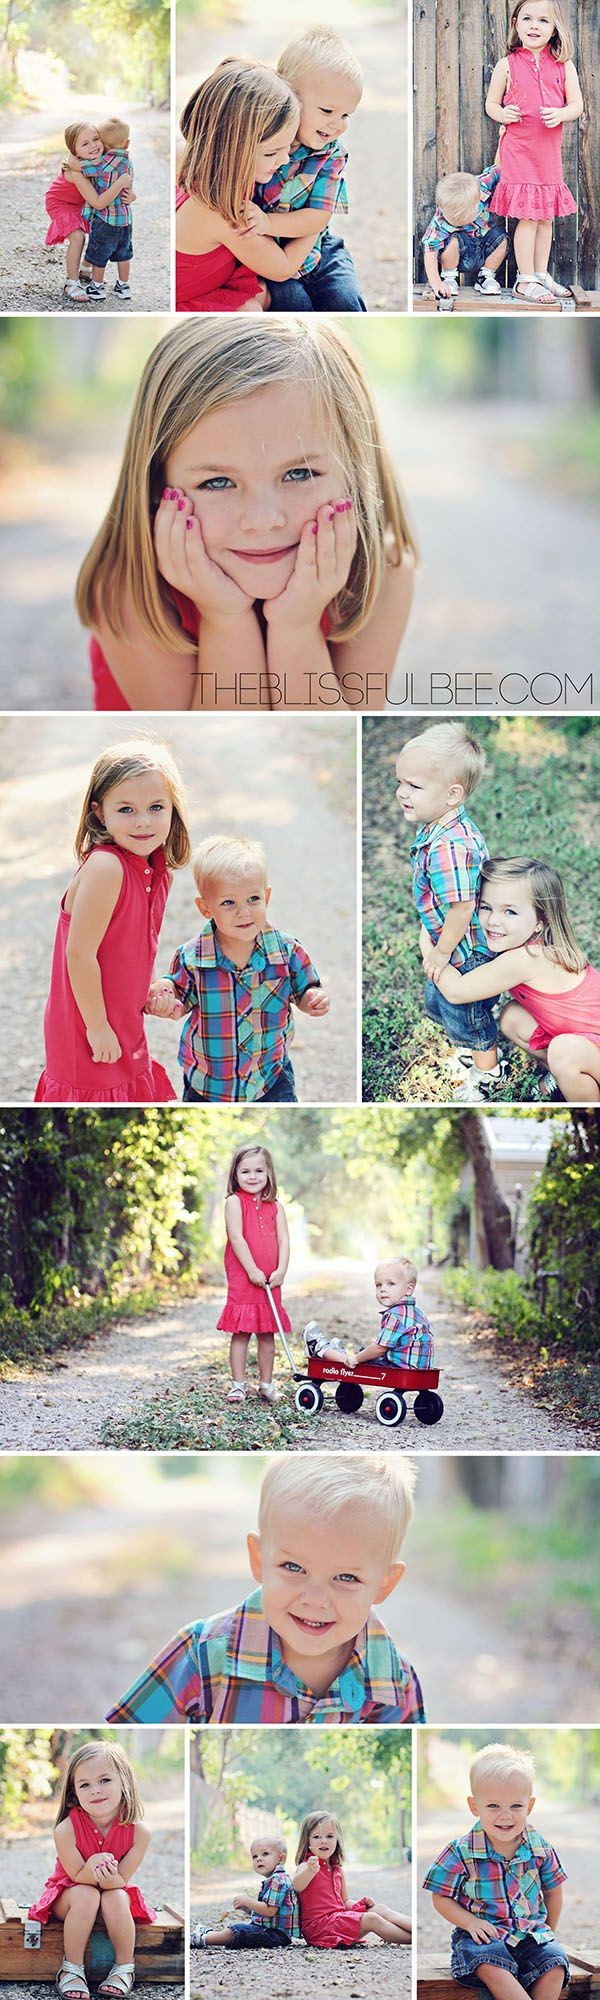 Children Photography - The Blissful Bee Blog